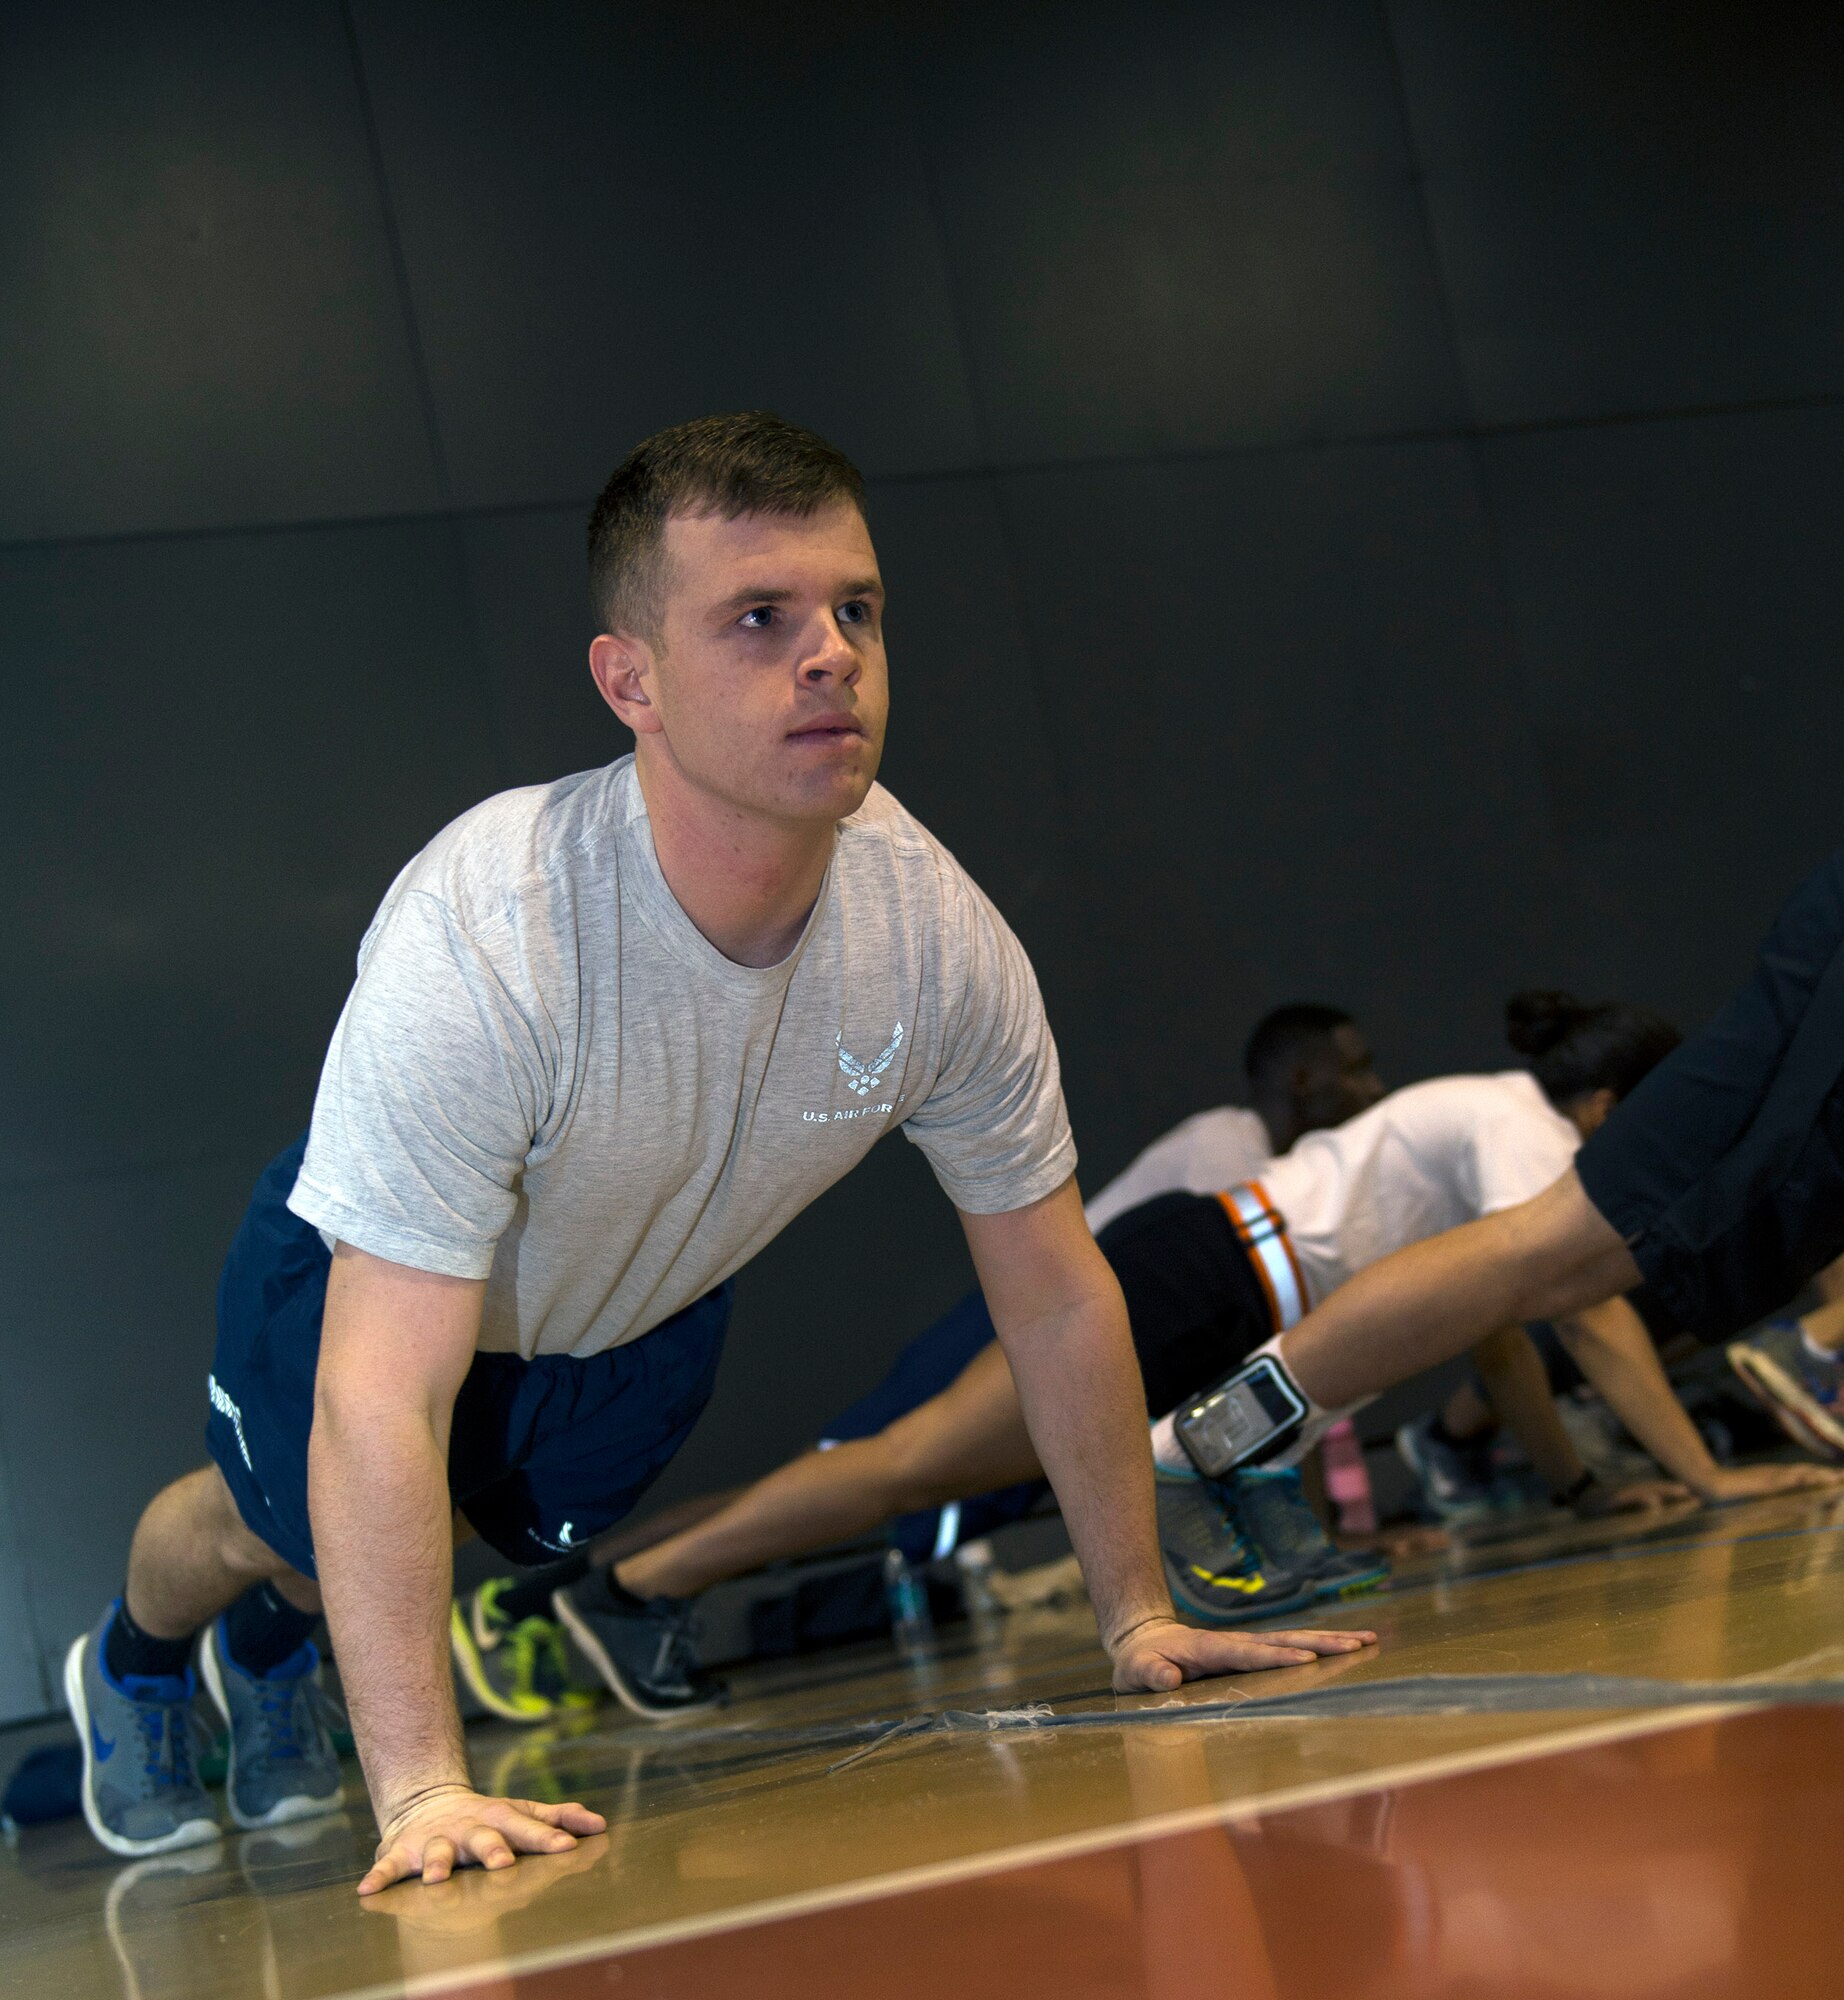 Cadet Col. Bradley Joyal, Air Force ROTC Detachment 172 cadet wing commander, performs a push-up during physical training with fellow cadets at a local college, Nov.16, 2015, in Valdosta, Ga. Joyal, a Georgia native, turned down several baseball scholarships to stay near home and entered Valdosta State University’s AFROTC program in hopes to serve his country like his father, a retired Chief Master Sergeant. (U.S. Air Force photo by Airman 1st Class Greg Nash/Released)